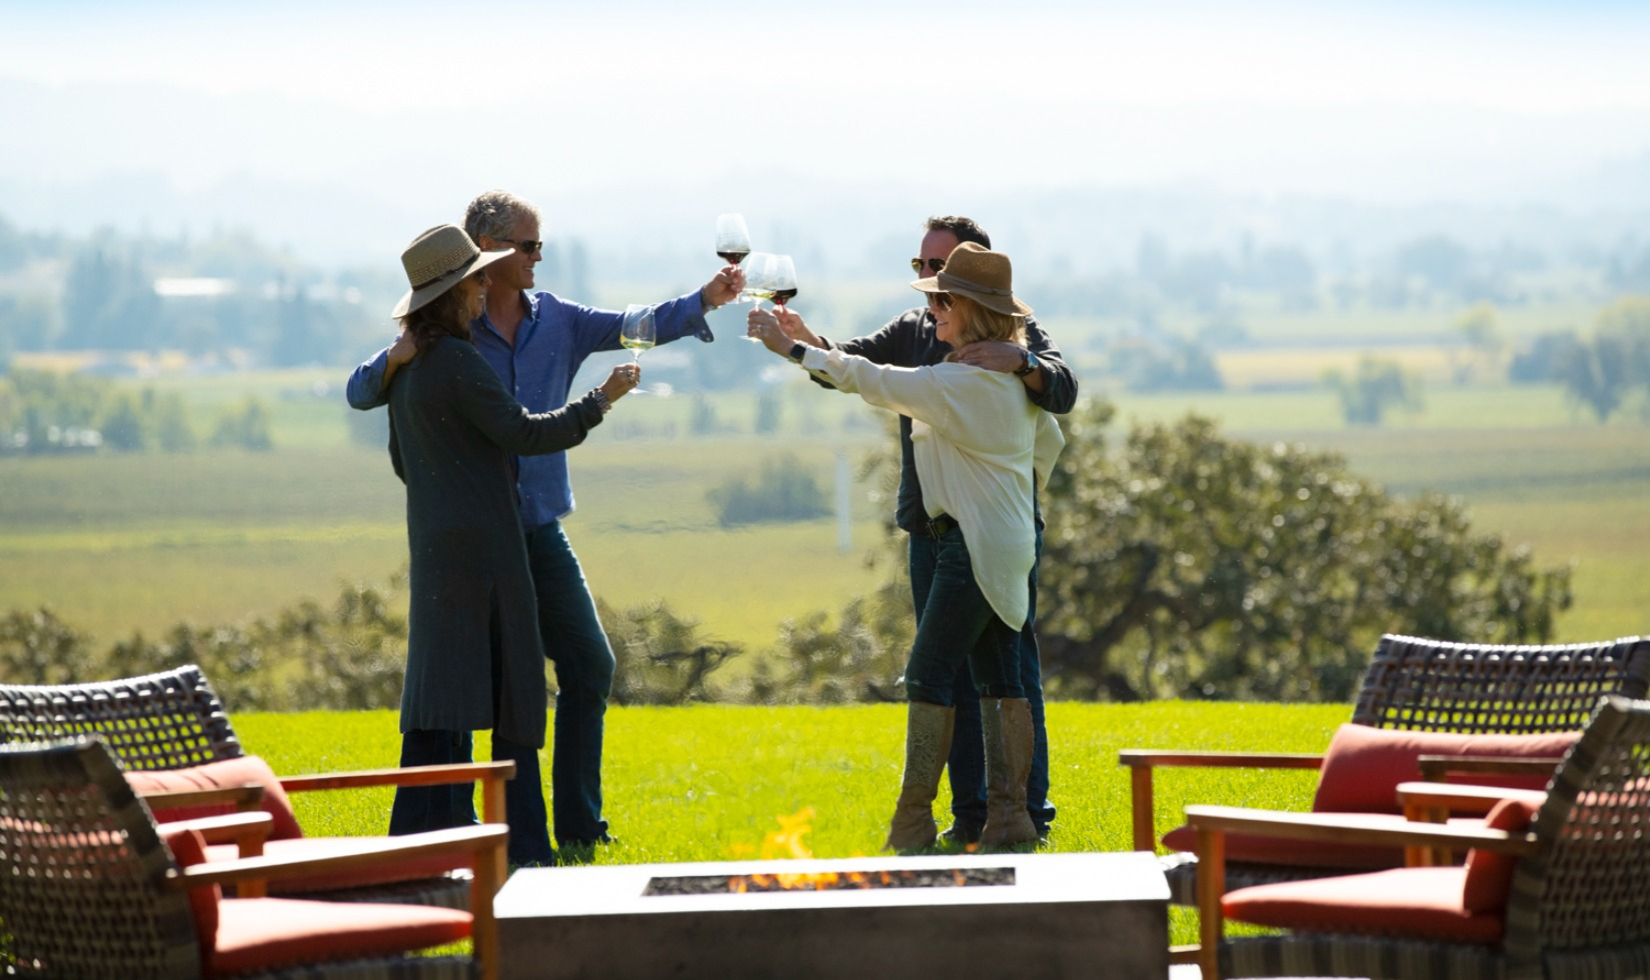 Group toasting with wine glasses with vineyard in background on sunny day